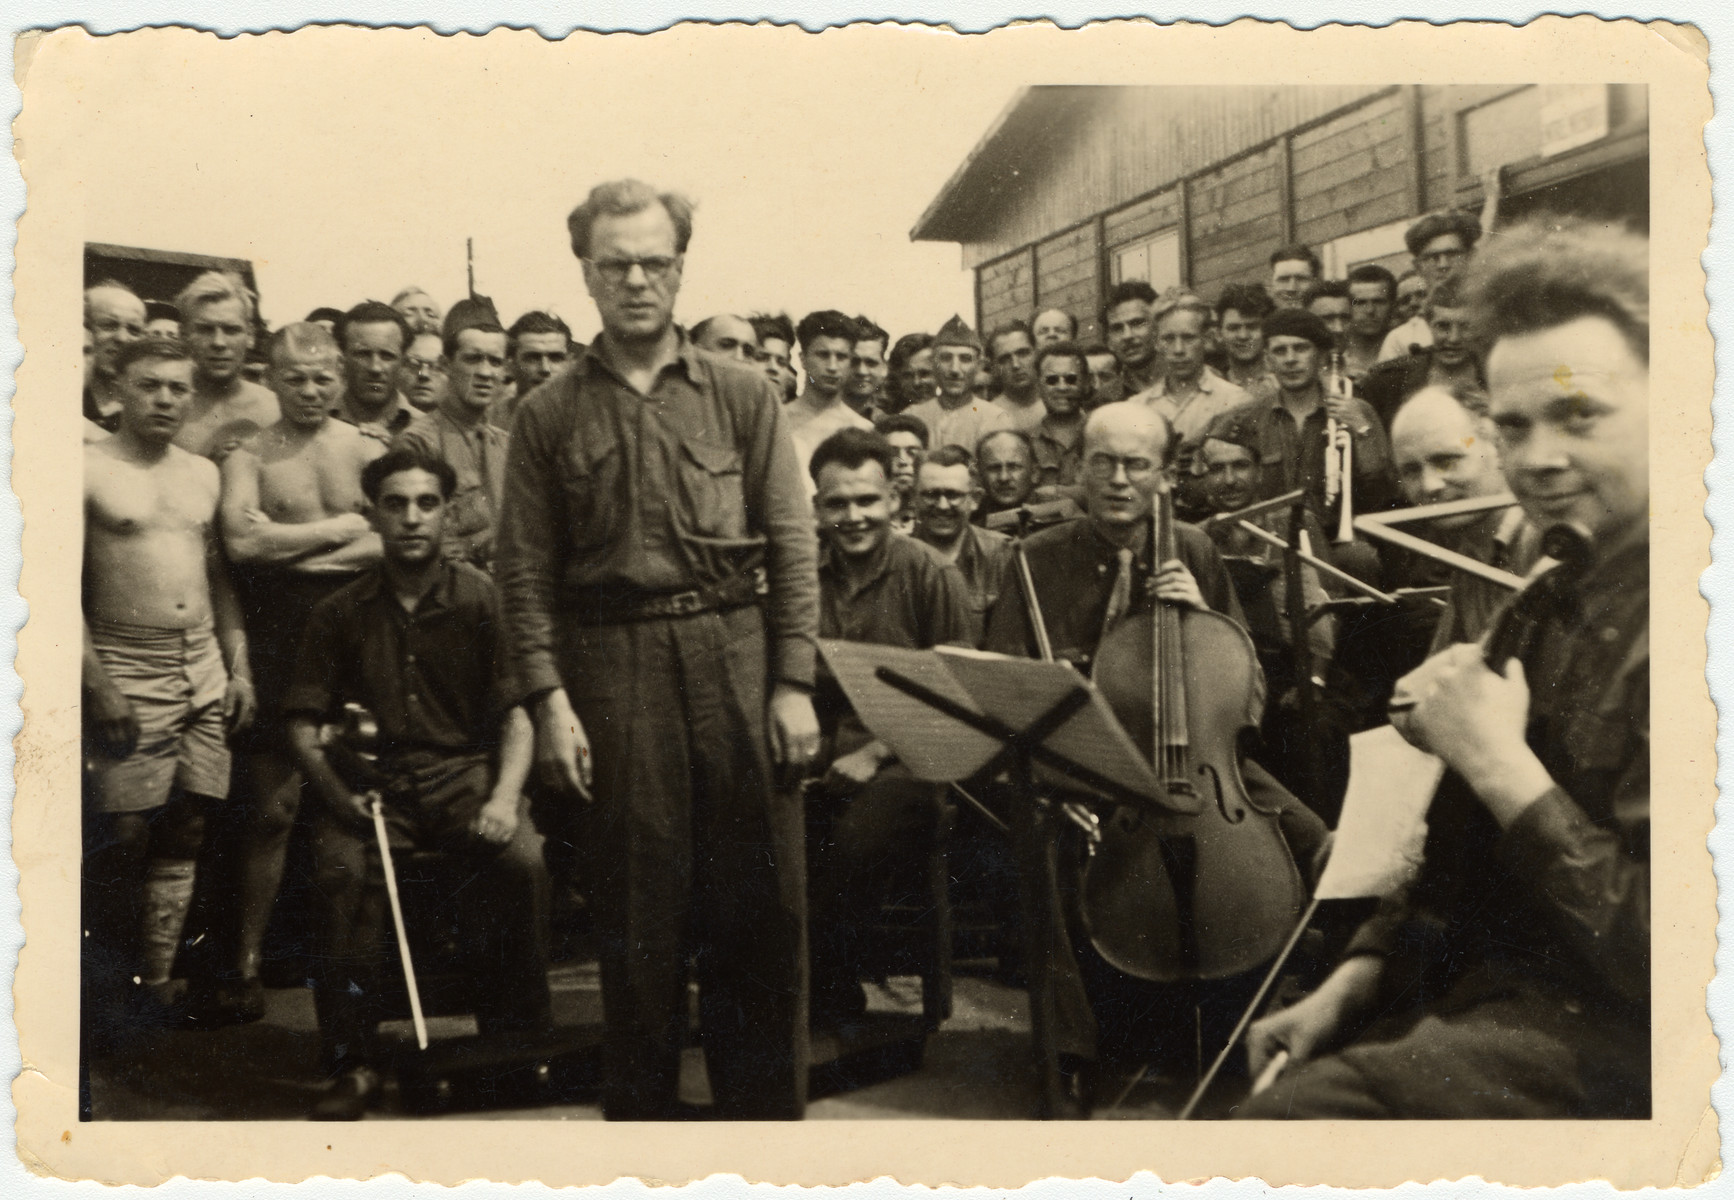 Performance by the prisoner orchestra at Stalag VIIIA in front of the infirmary.

Fernand Carion, a Belgian musician and prisoner-of-war is conducting.  Max Beker (concert master) is pictured sitting on the left.